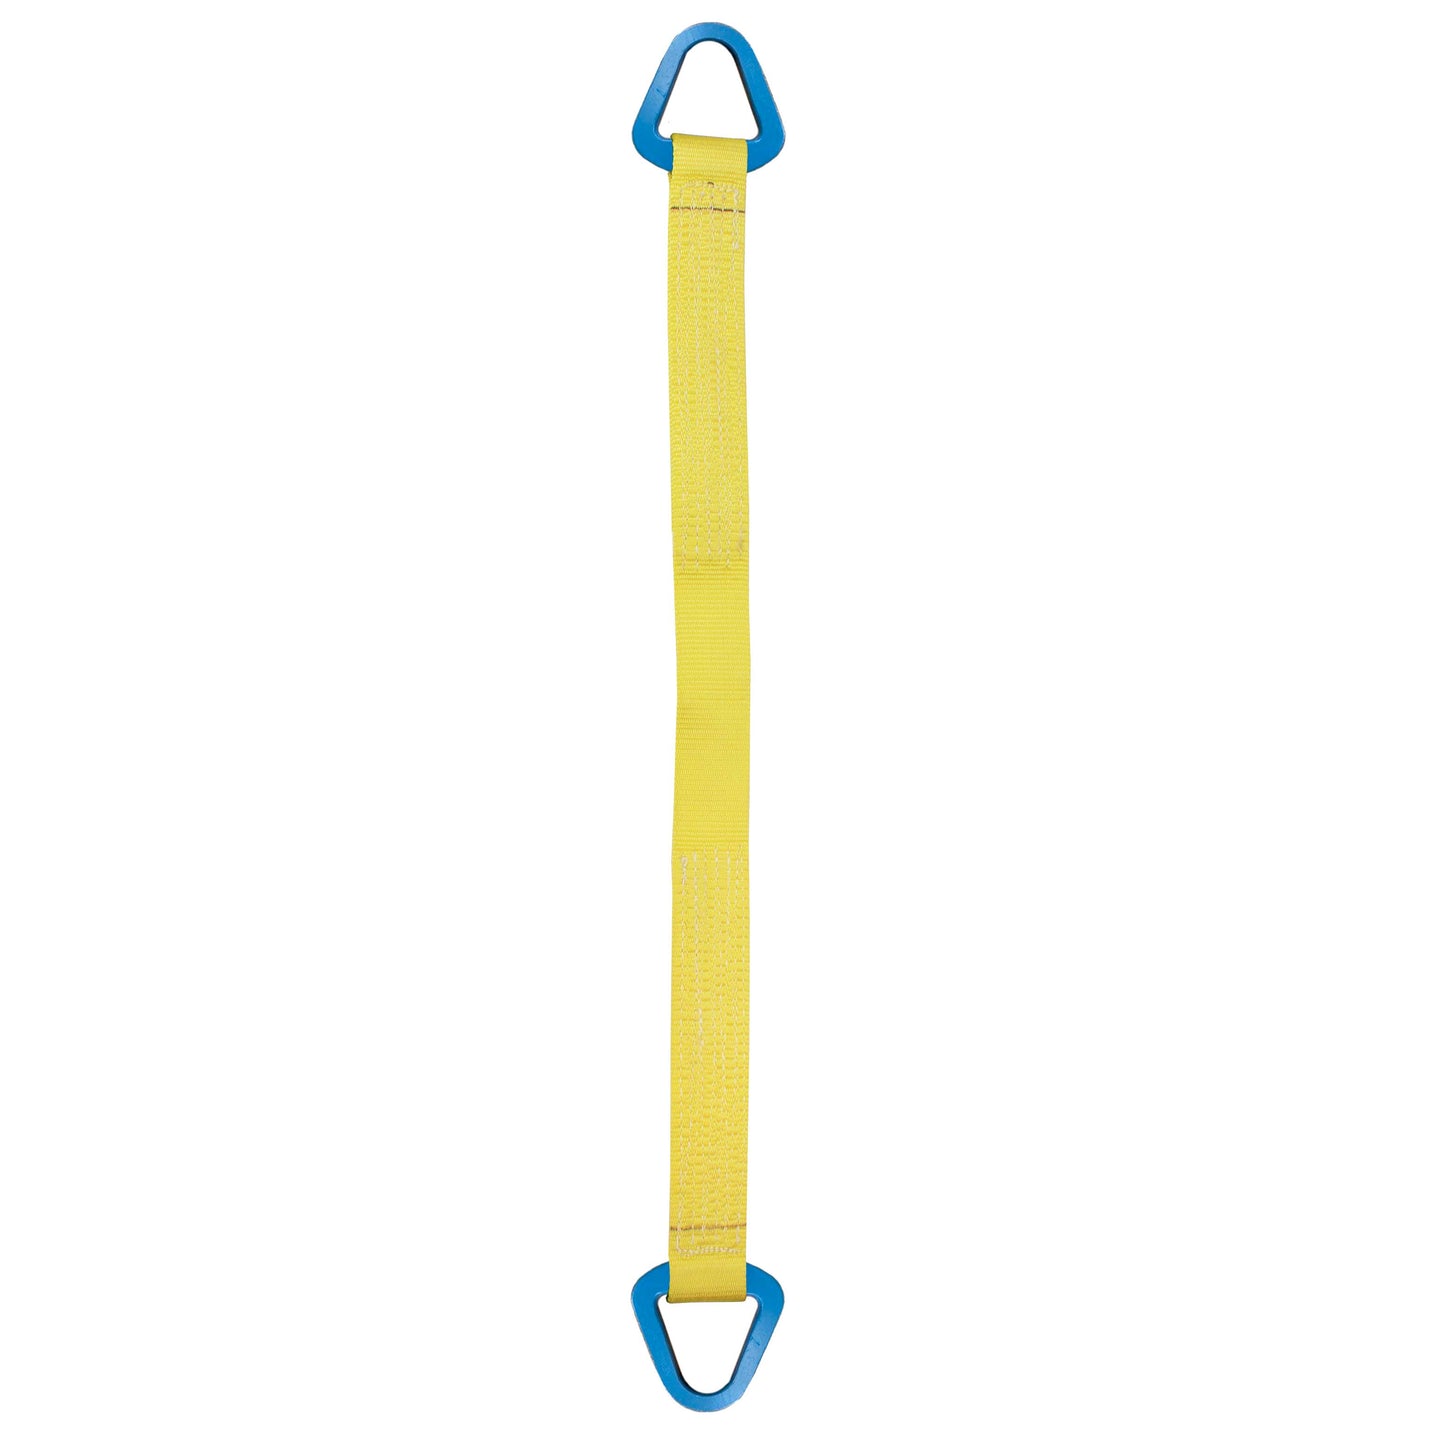 Nylon Lifting Sling Triangle 10 inch x 8 foot 1ply image 1 of 2